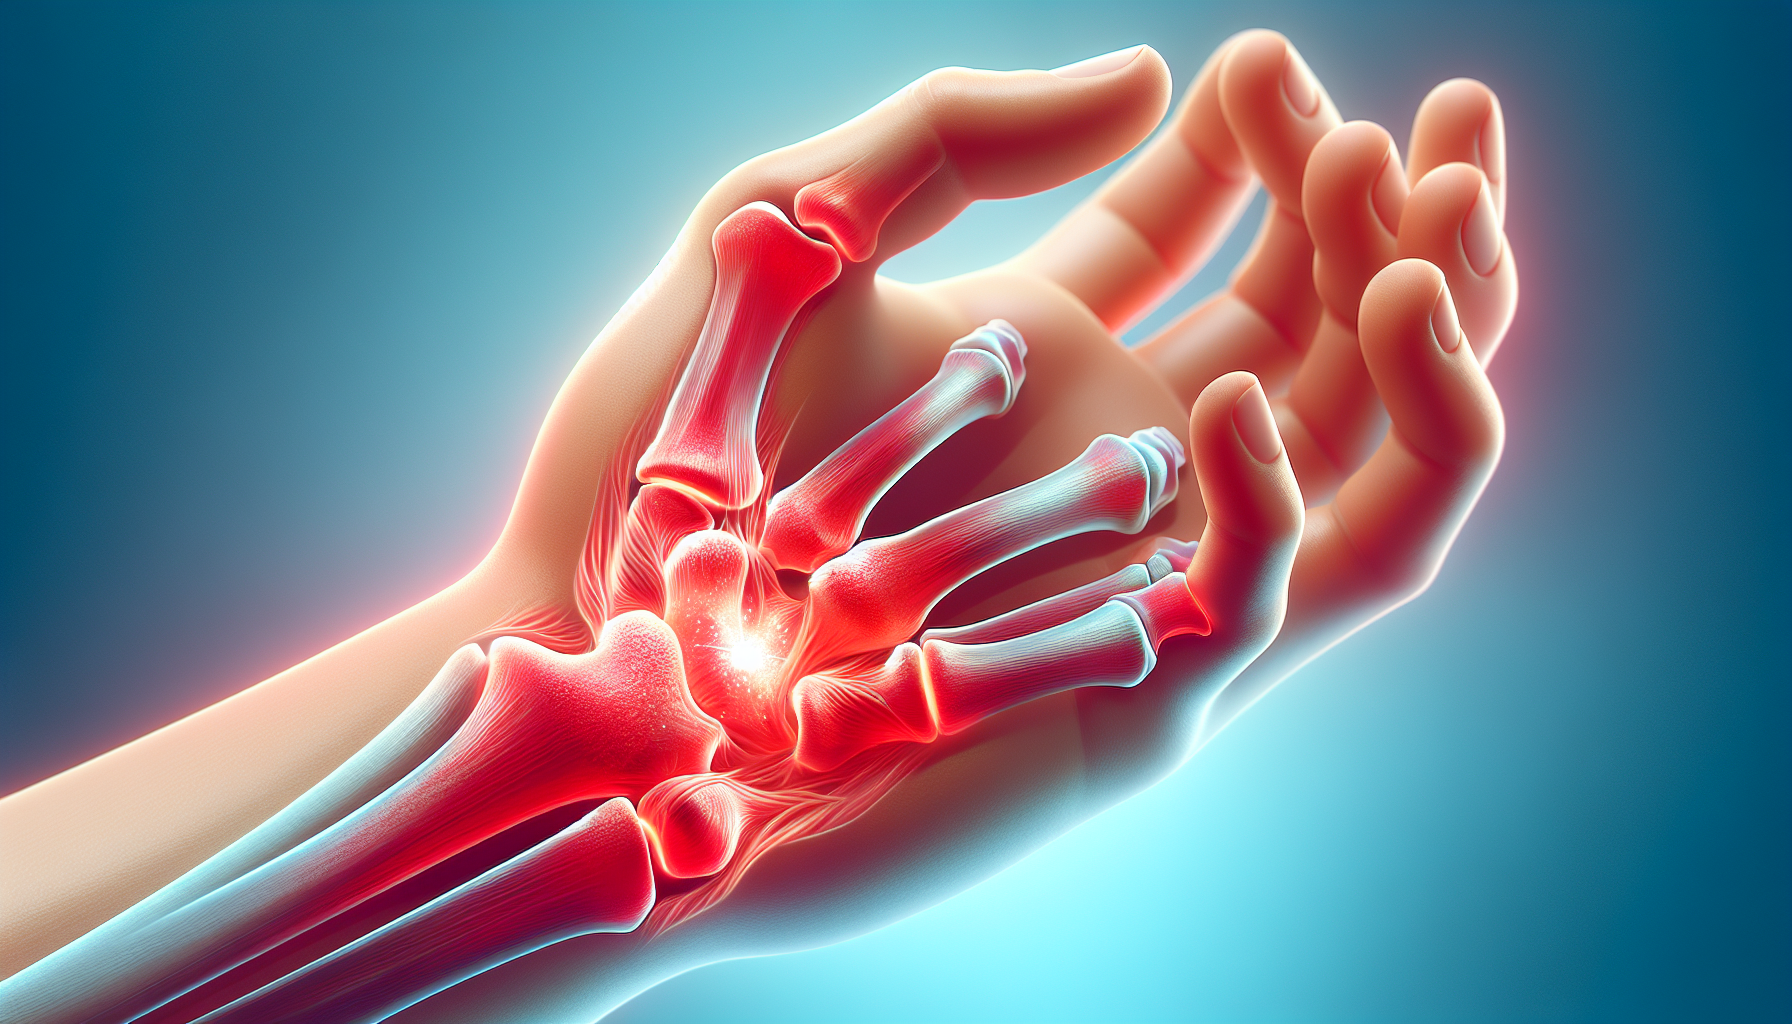 Illustration of inflamed wrist joint